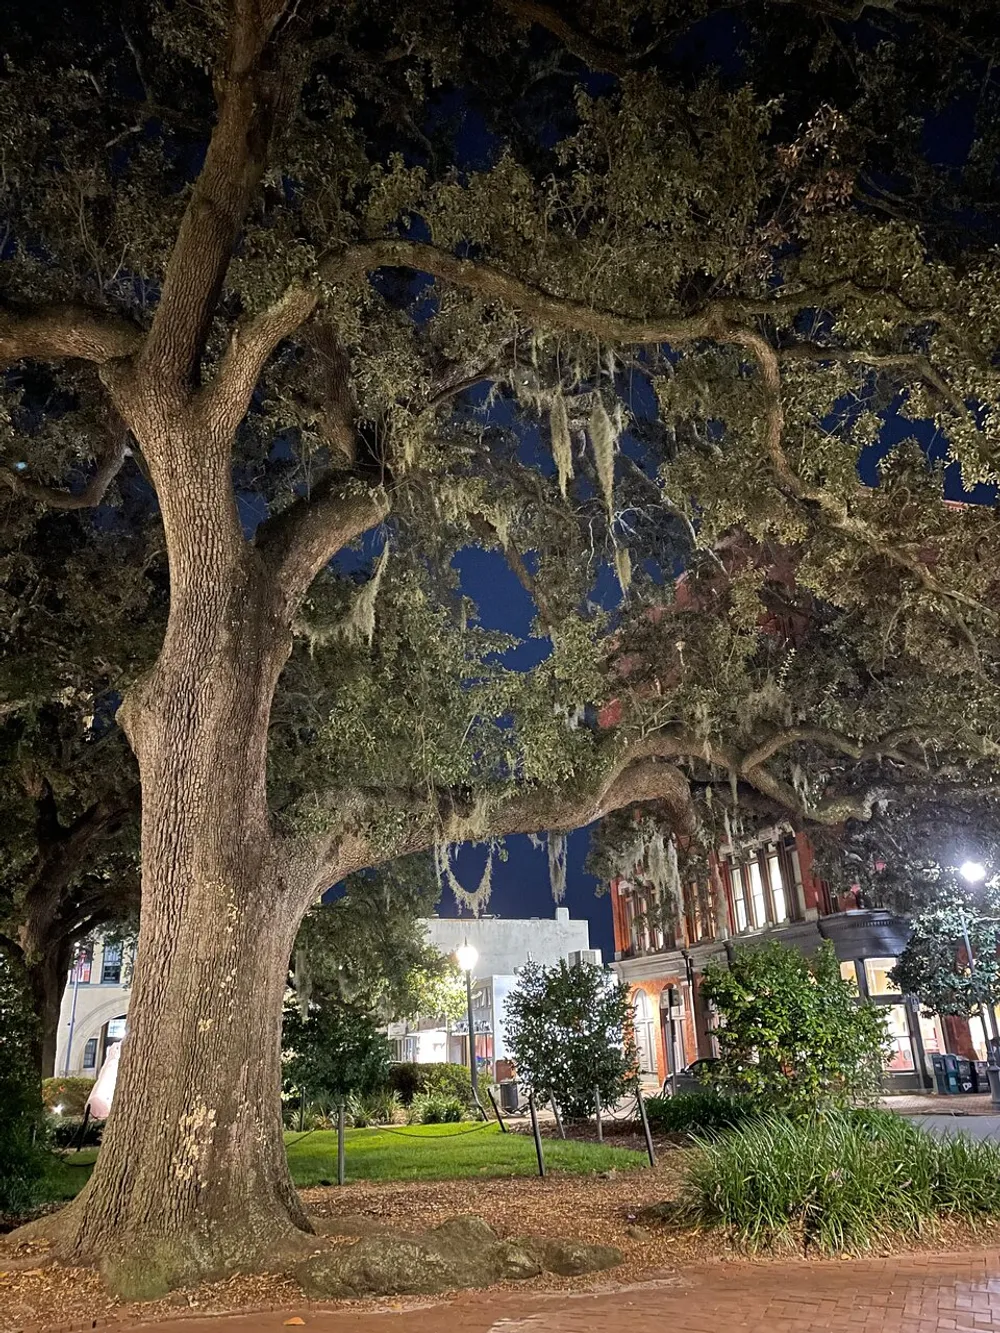 A majestic tree with spreading branches and Spanish moss stands in a well-lit urban park at night with surrounding buildings and a clear sky